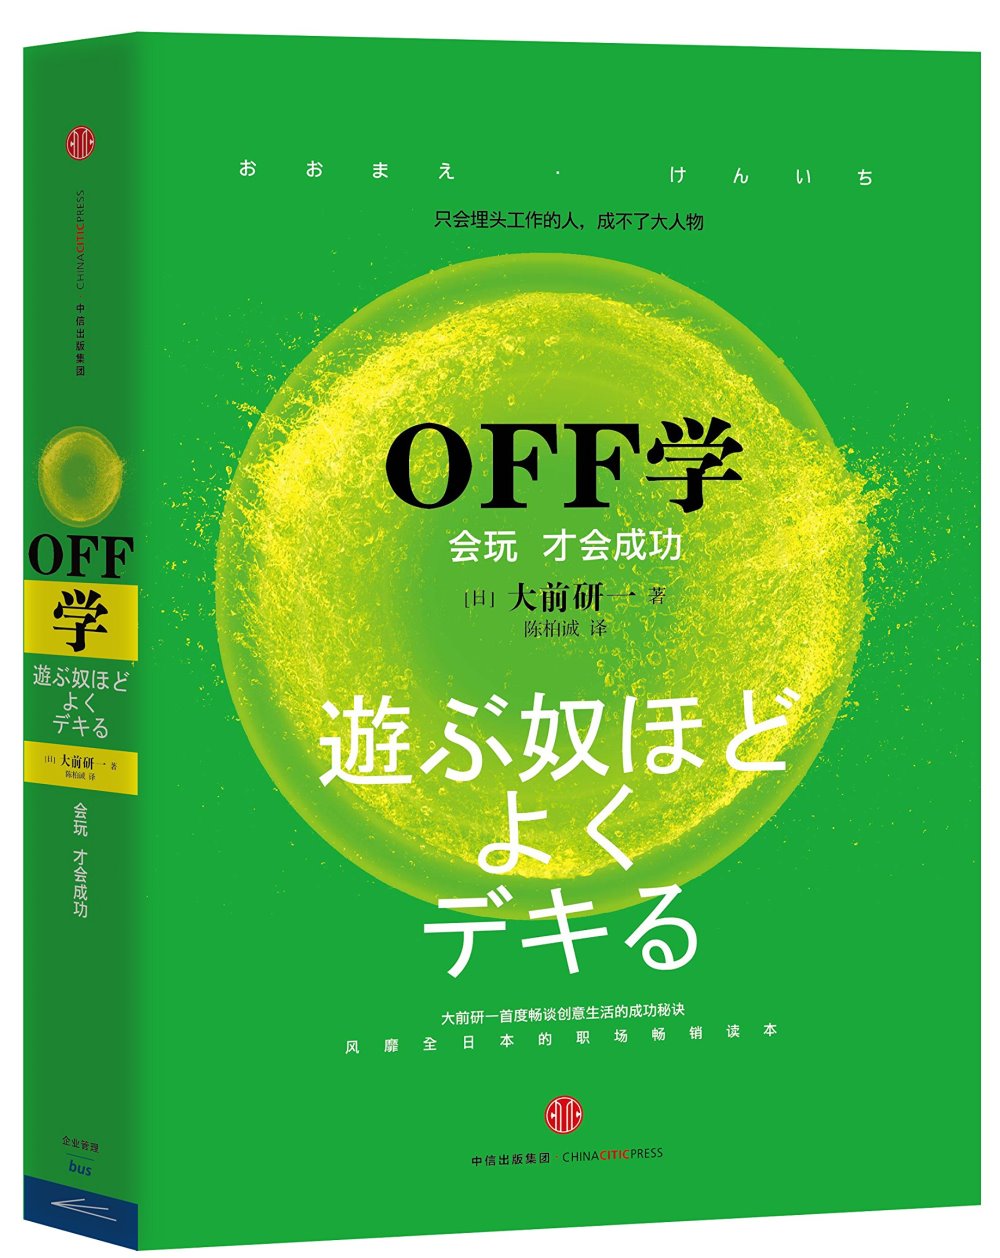 OFF學：會玩才會成功